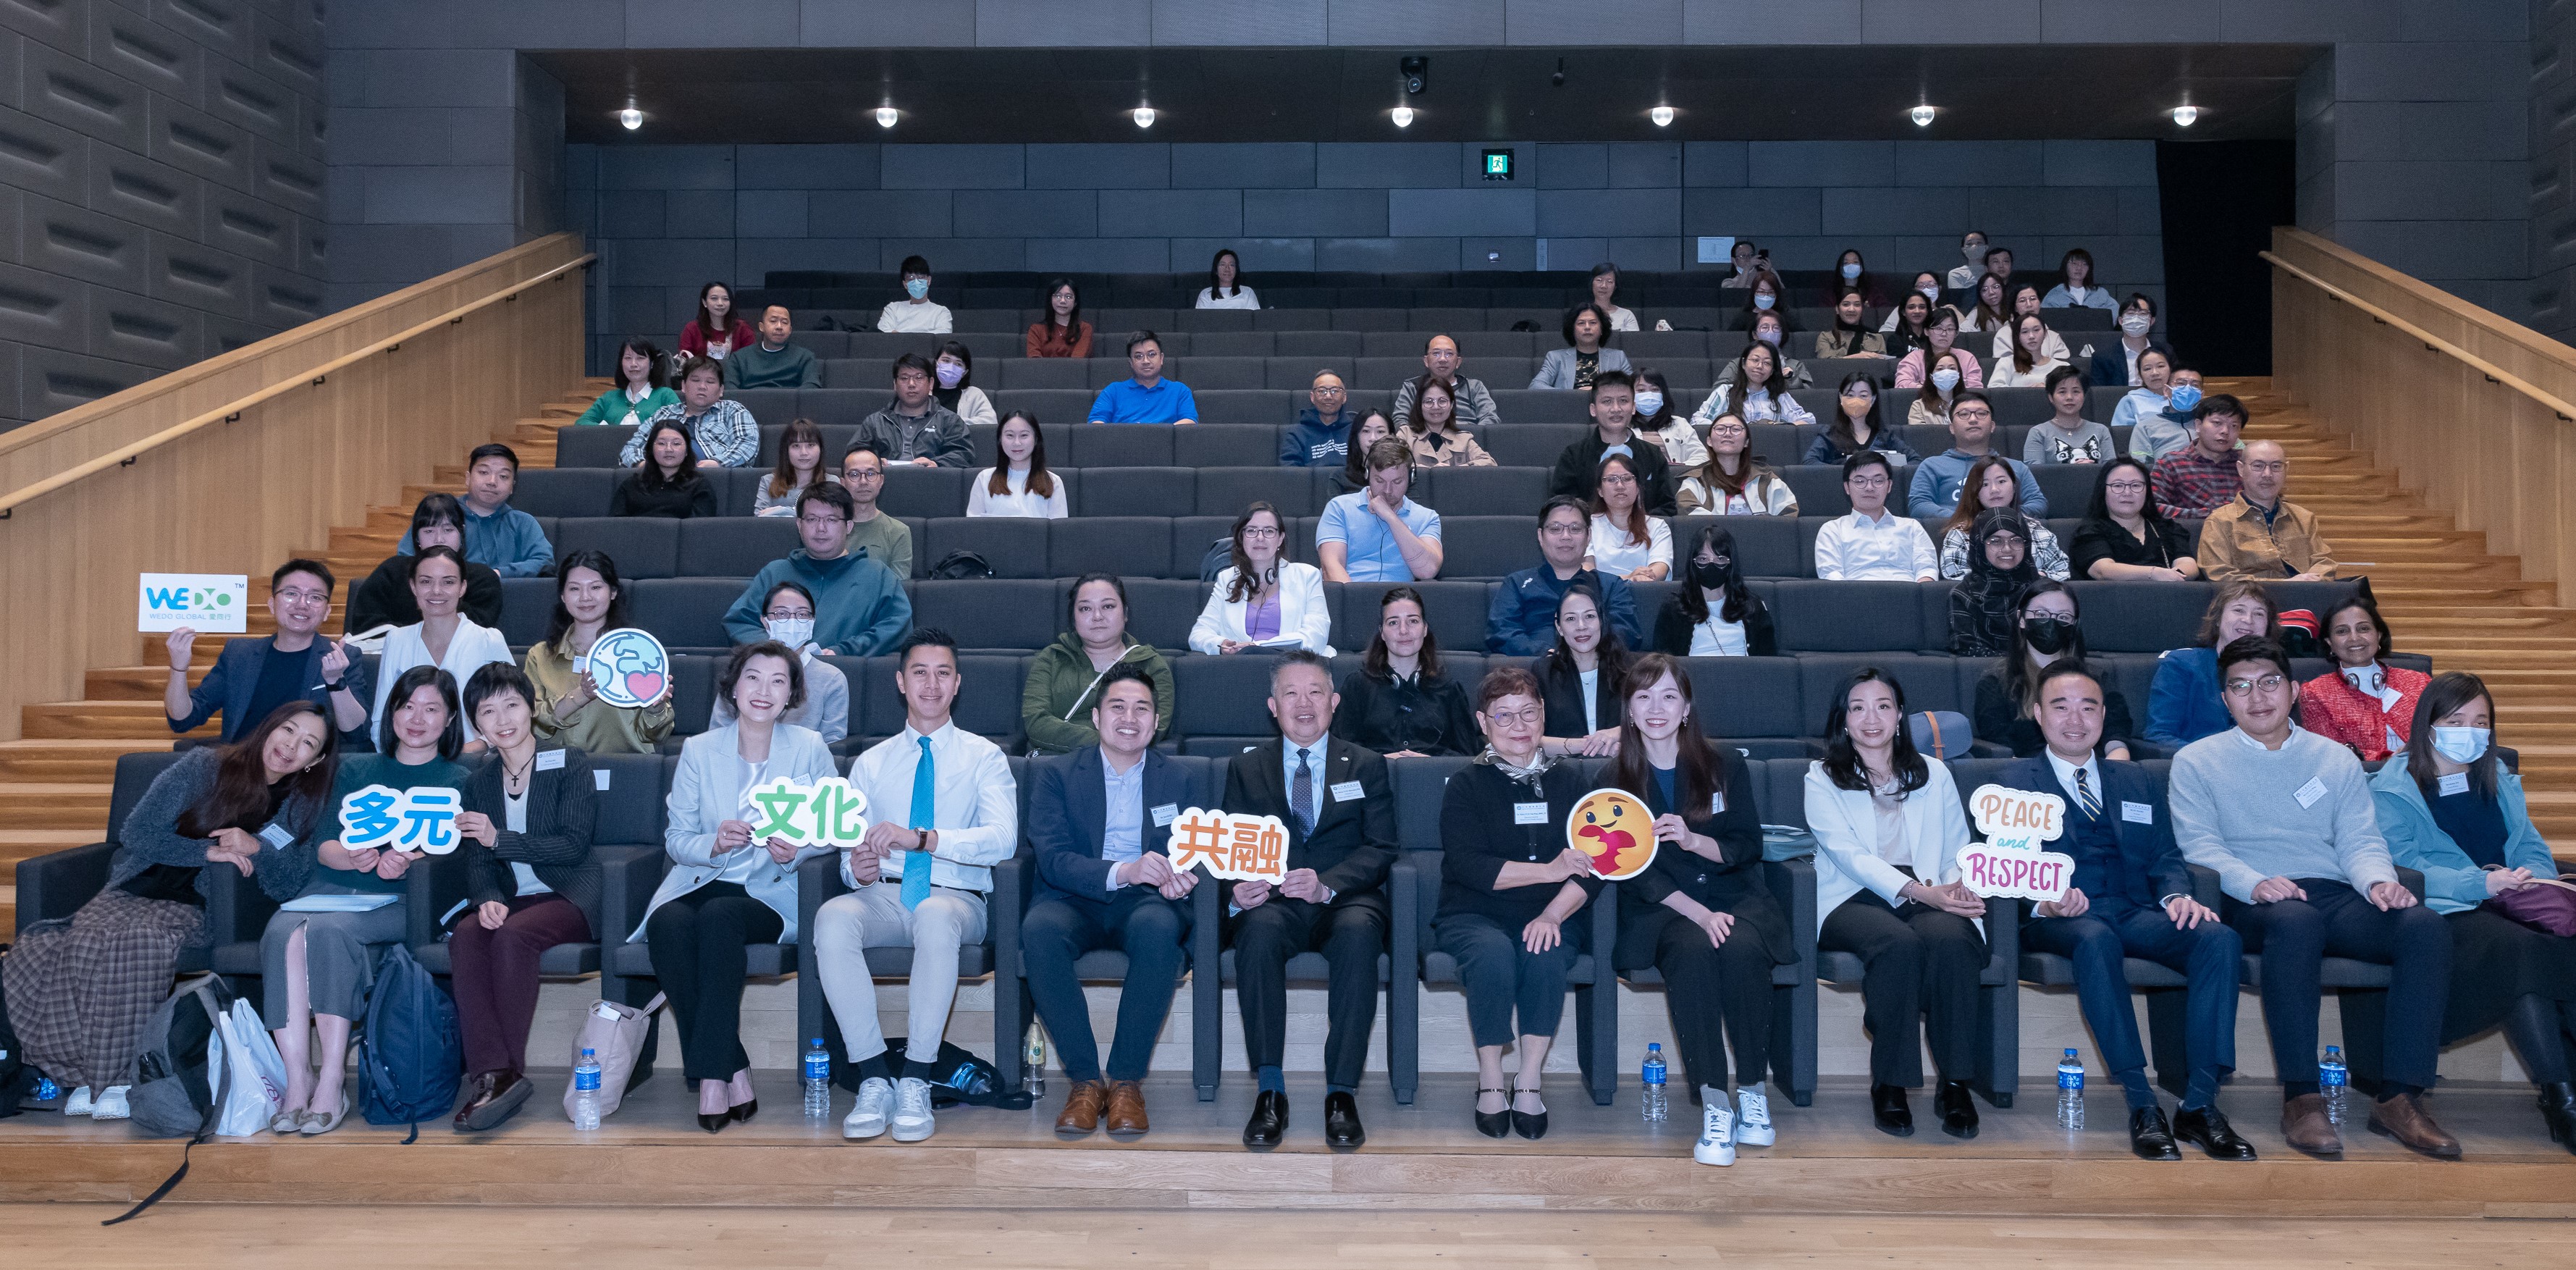 The EOC co-organised with two NGOs Inspiring Girls Hong Kong and WEDO Global on the Diversity & Inclusion Education Forum on 16 March, which was attended by nearly 100 educators and school representatives.